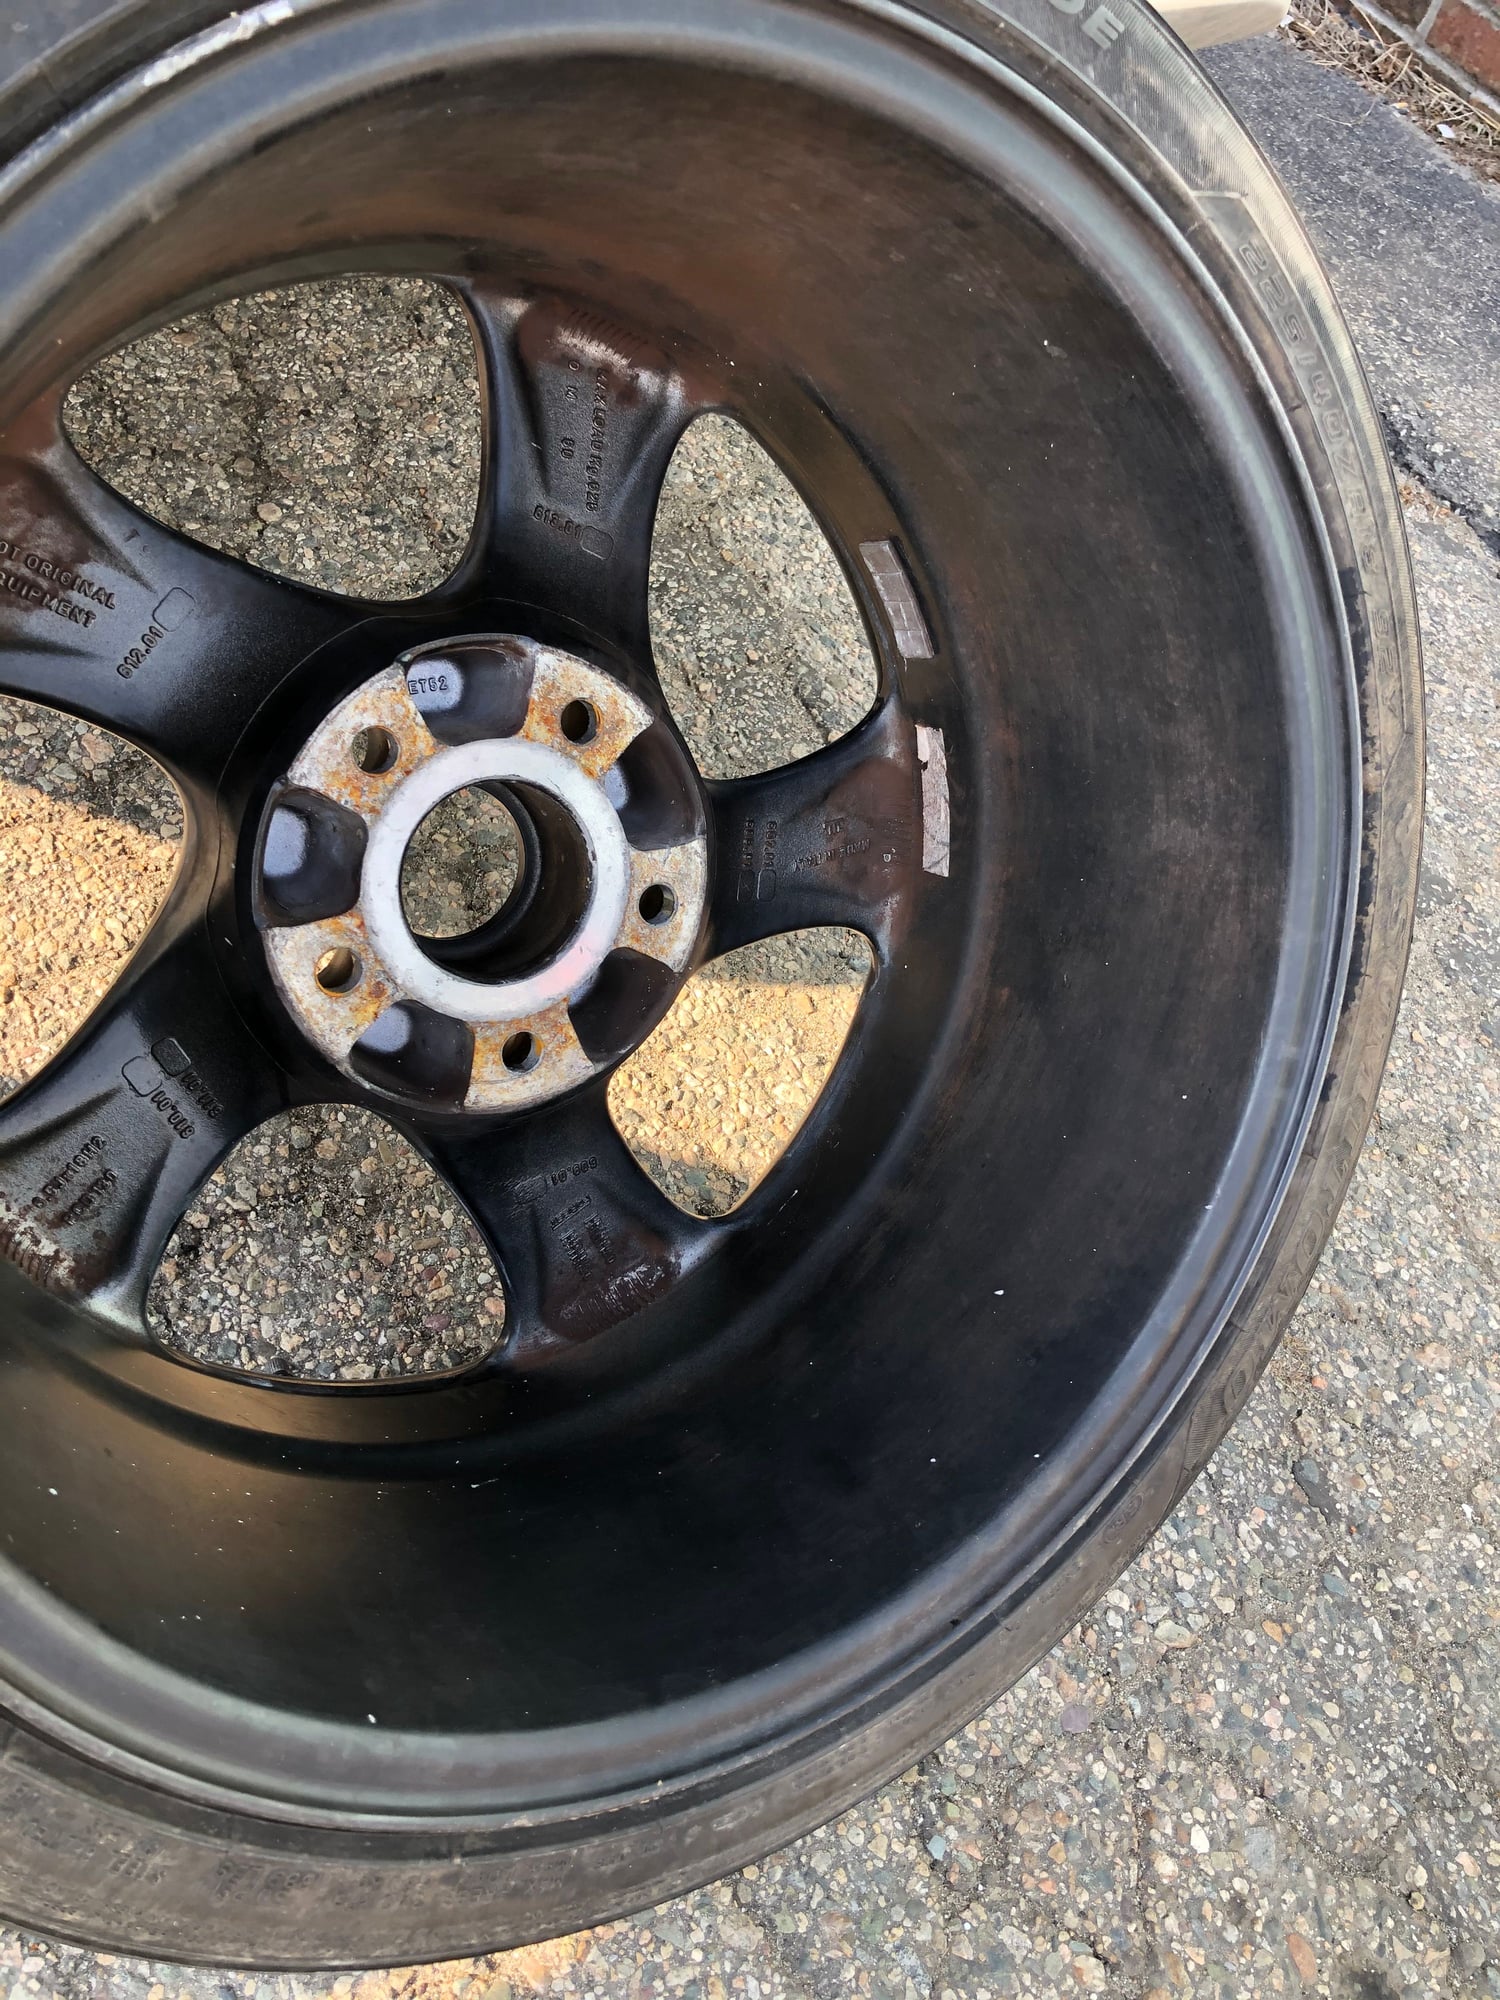 Wheels and Tires/Axles - 18" Rims 8.5 x 18 and 10 x 18 - Used - All Years Porsche All Models - Swansea, MA 02777, United States